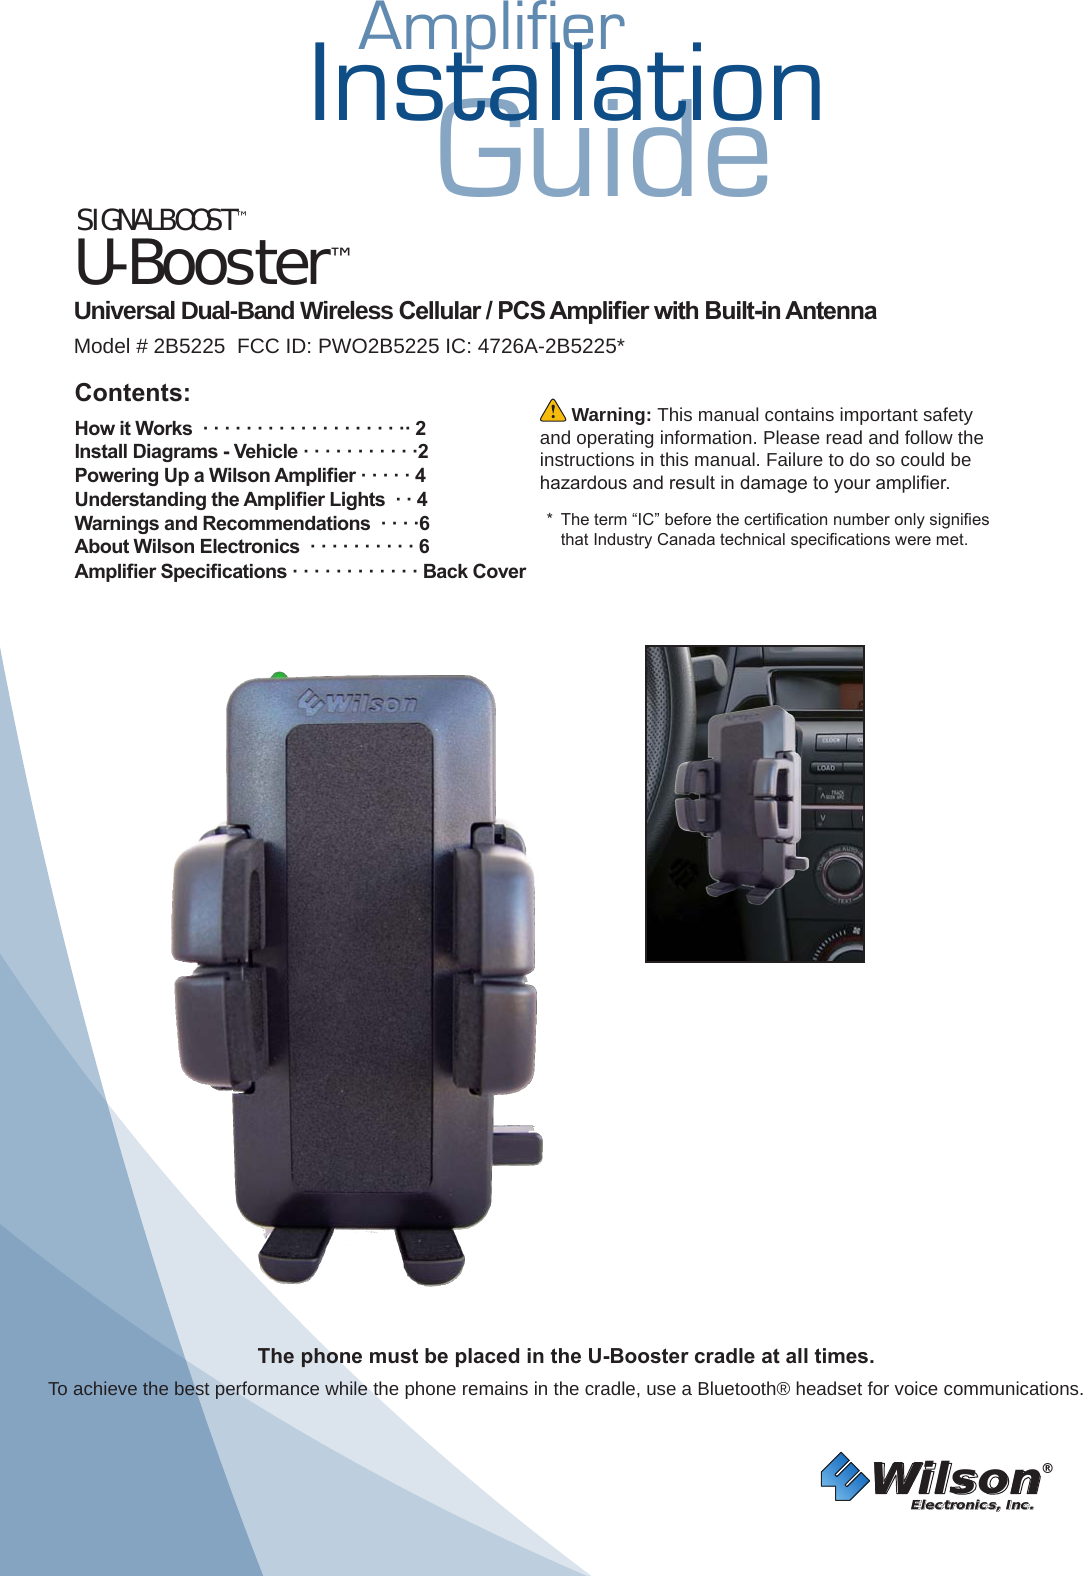 AmplifierInstallationGuide SIGNALBOOST™U-Booster™ Universal Dual-Band Wireless Cellular / PCS Amplier with Built-in Antenna Model # 2B5225  FCC ID: PWO2B5225 IC: 4726A-2B5225*Wilson®         Electronics, Inc. Warning: This manual contains important safety and operating information. Please read and follow the instructions in this manual. Failure to do so could be hazardous and result in damage to your amplier.  *  The term “IC” before the certication number only signies that Industry Canada technical specications were met. Contents:How it Works  · · · · · · · · · · · · · · · · · · ·· 2 Install Diagrams - Vehicle · · · · · · · · · · ·2Powering Up a Wilson Amplier · · · · · 4 Understanding the Amplier Lights  · · 4Warnings and Recommendations  · · · ·6About Wilson Electronics  · · · · · · · · · · 6Amplier Specications · · · · · · · · · · · · Back CoverThe phone must be placed in the U-Booster cradle at all times. To achieve the best performance while the phone remains in the cradle, use a Bluetooth® headset for voice communications.